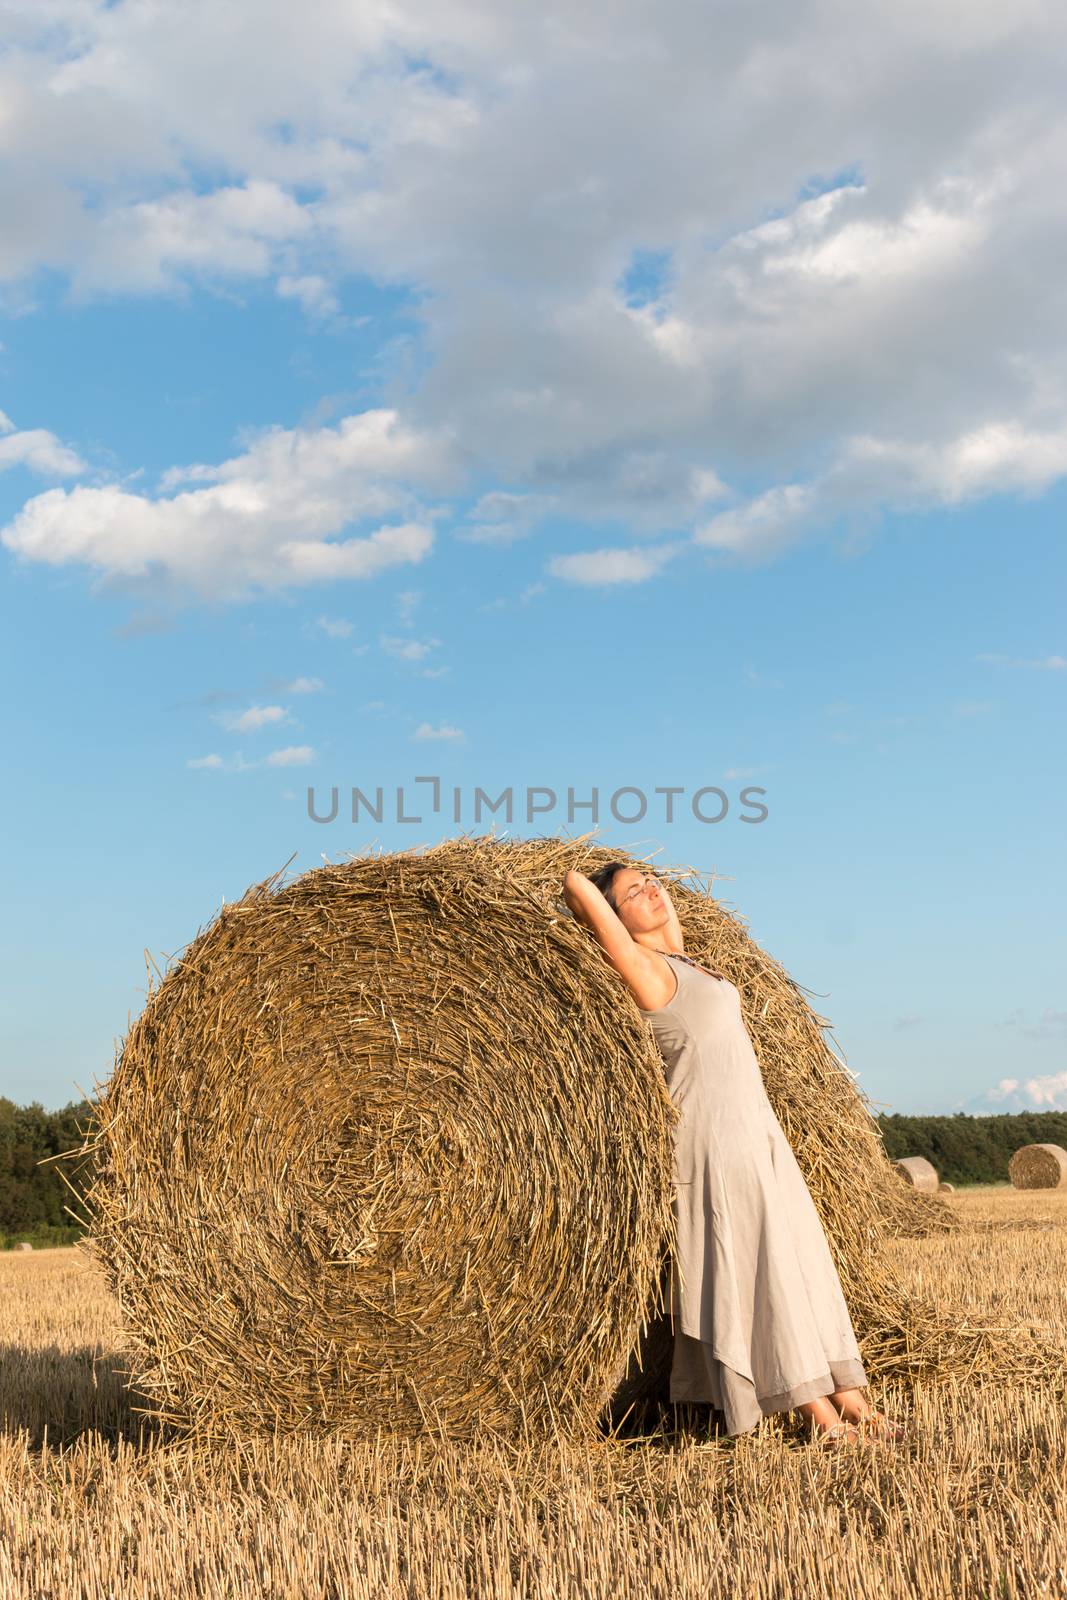 Girl and straw bales by Digoarpi